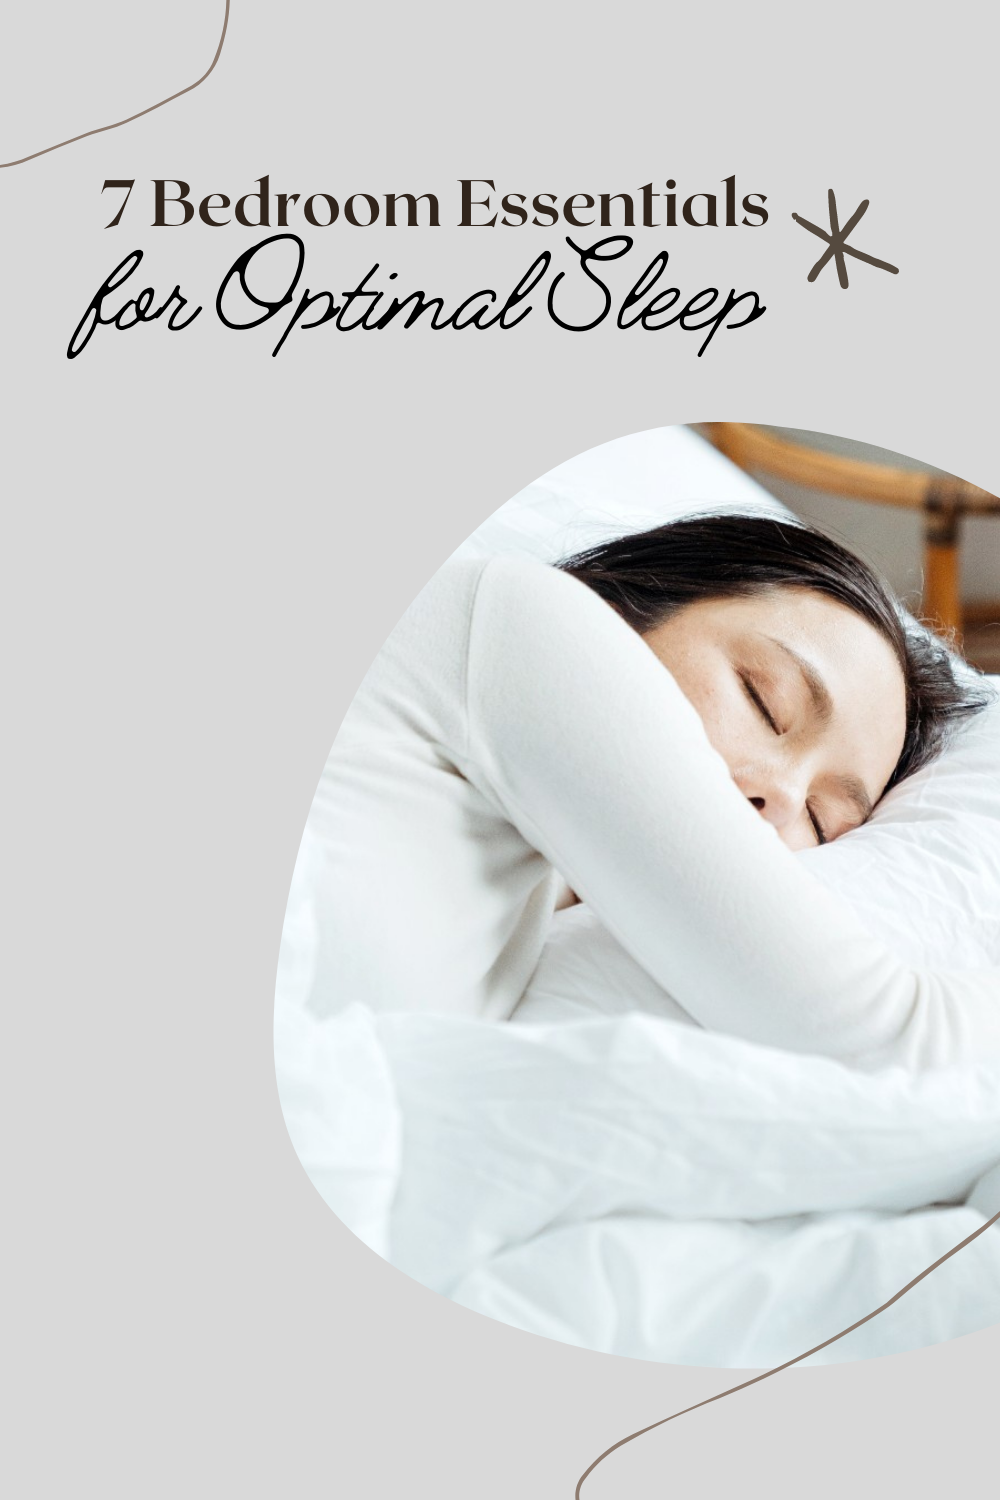 A woman sleeps in a bright room. This article covers 7 bedroom essentials for optimal sleep.